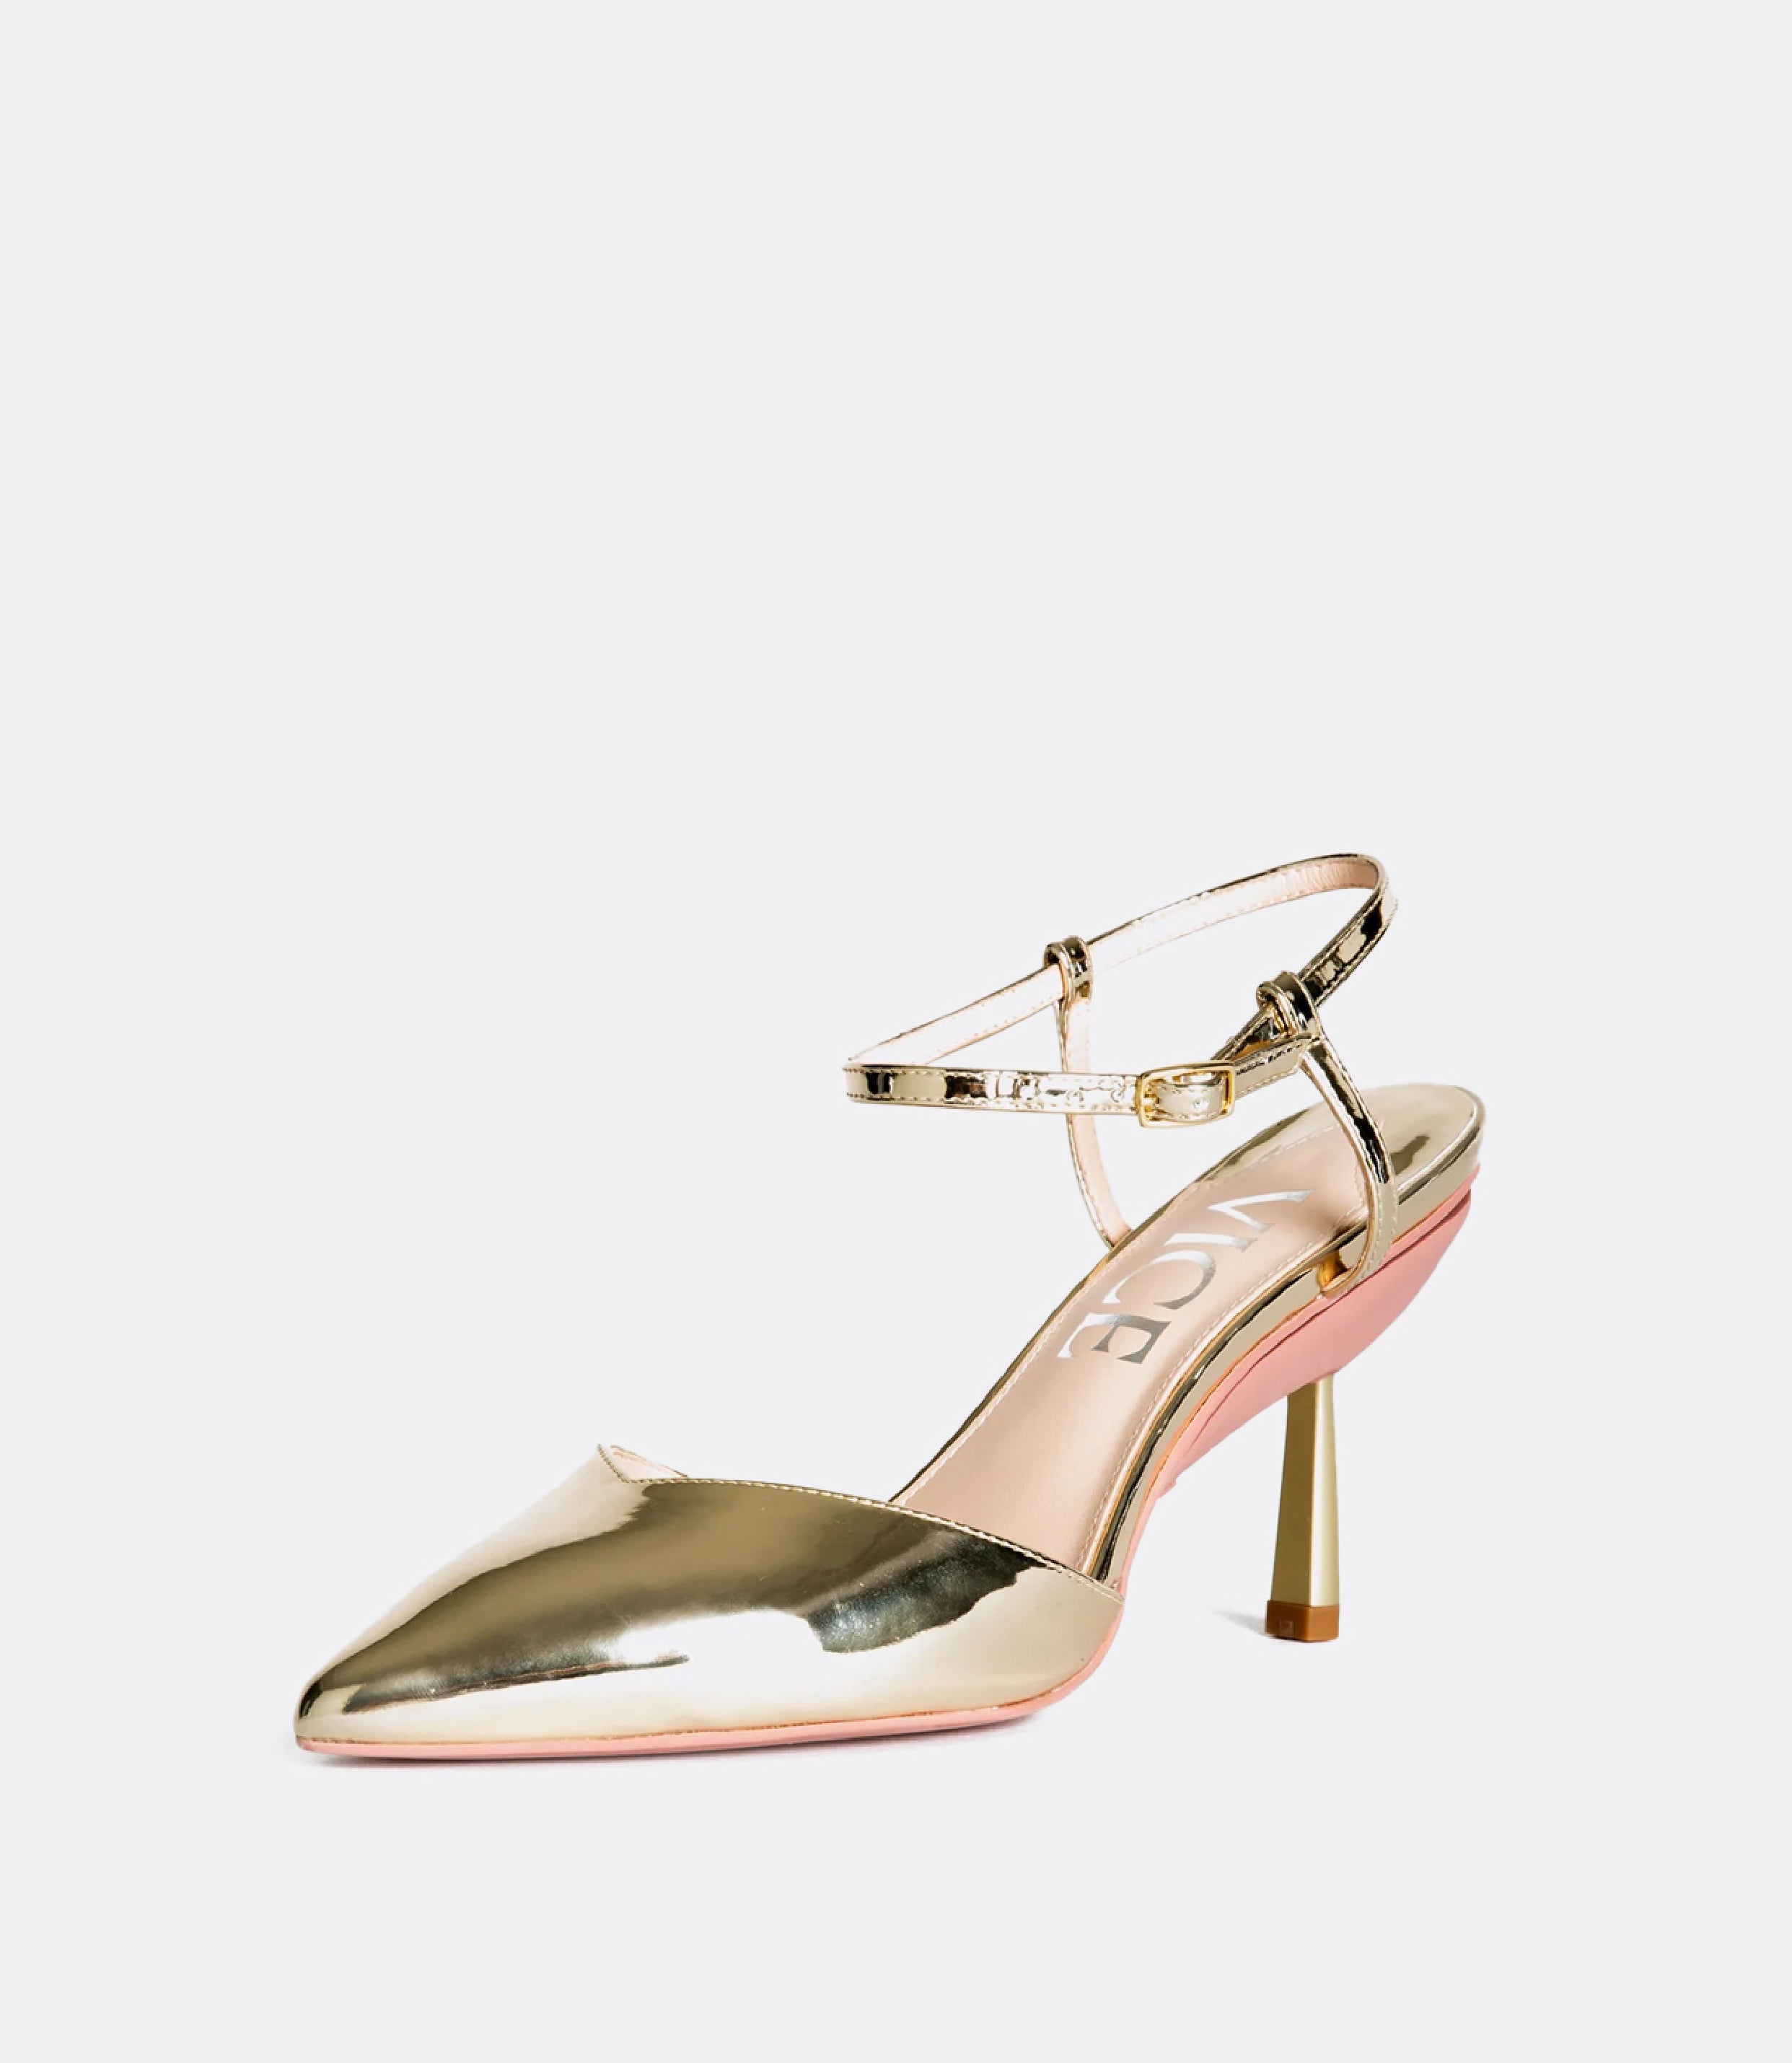 Front view of gold ankle strap pumps.